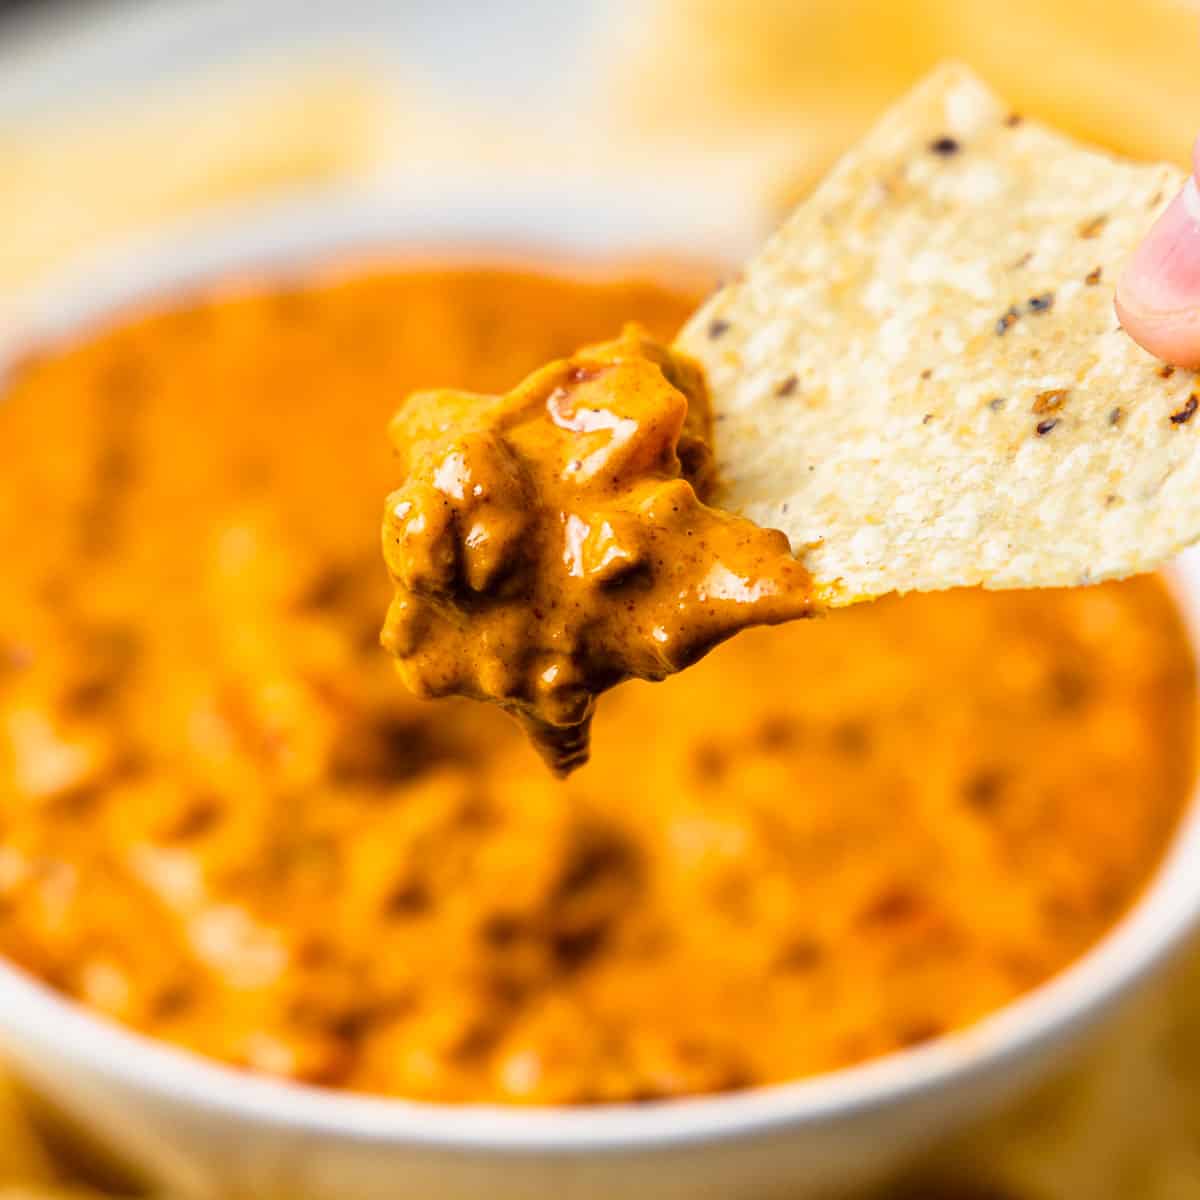 A tortilla chip with a scoop of chili cheese dip.